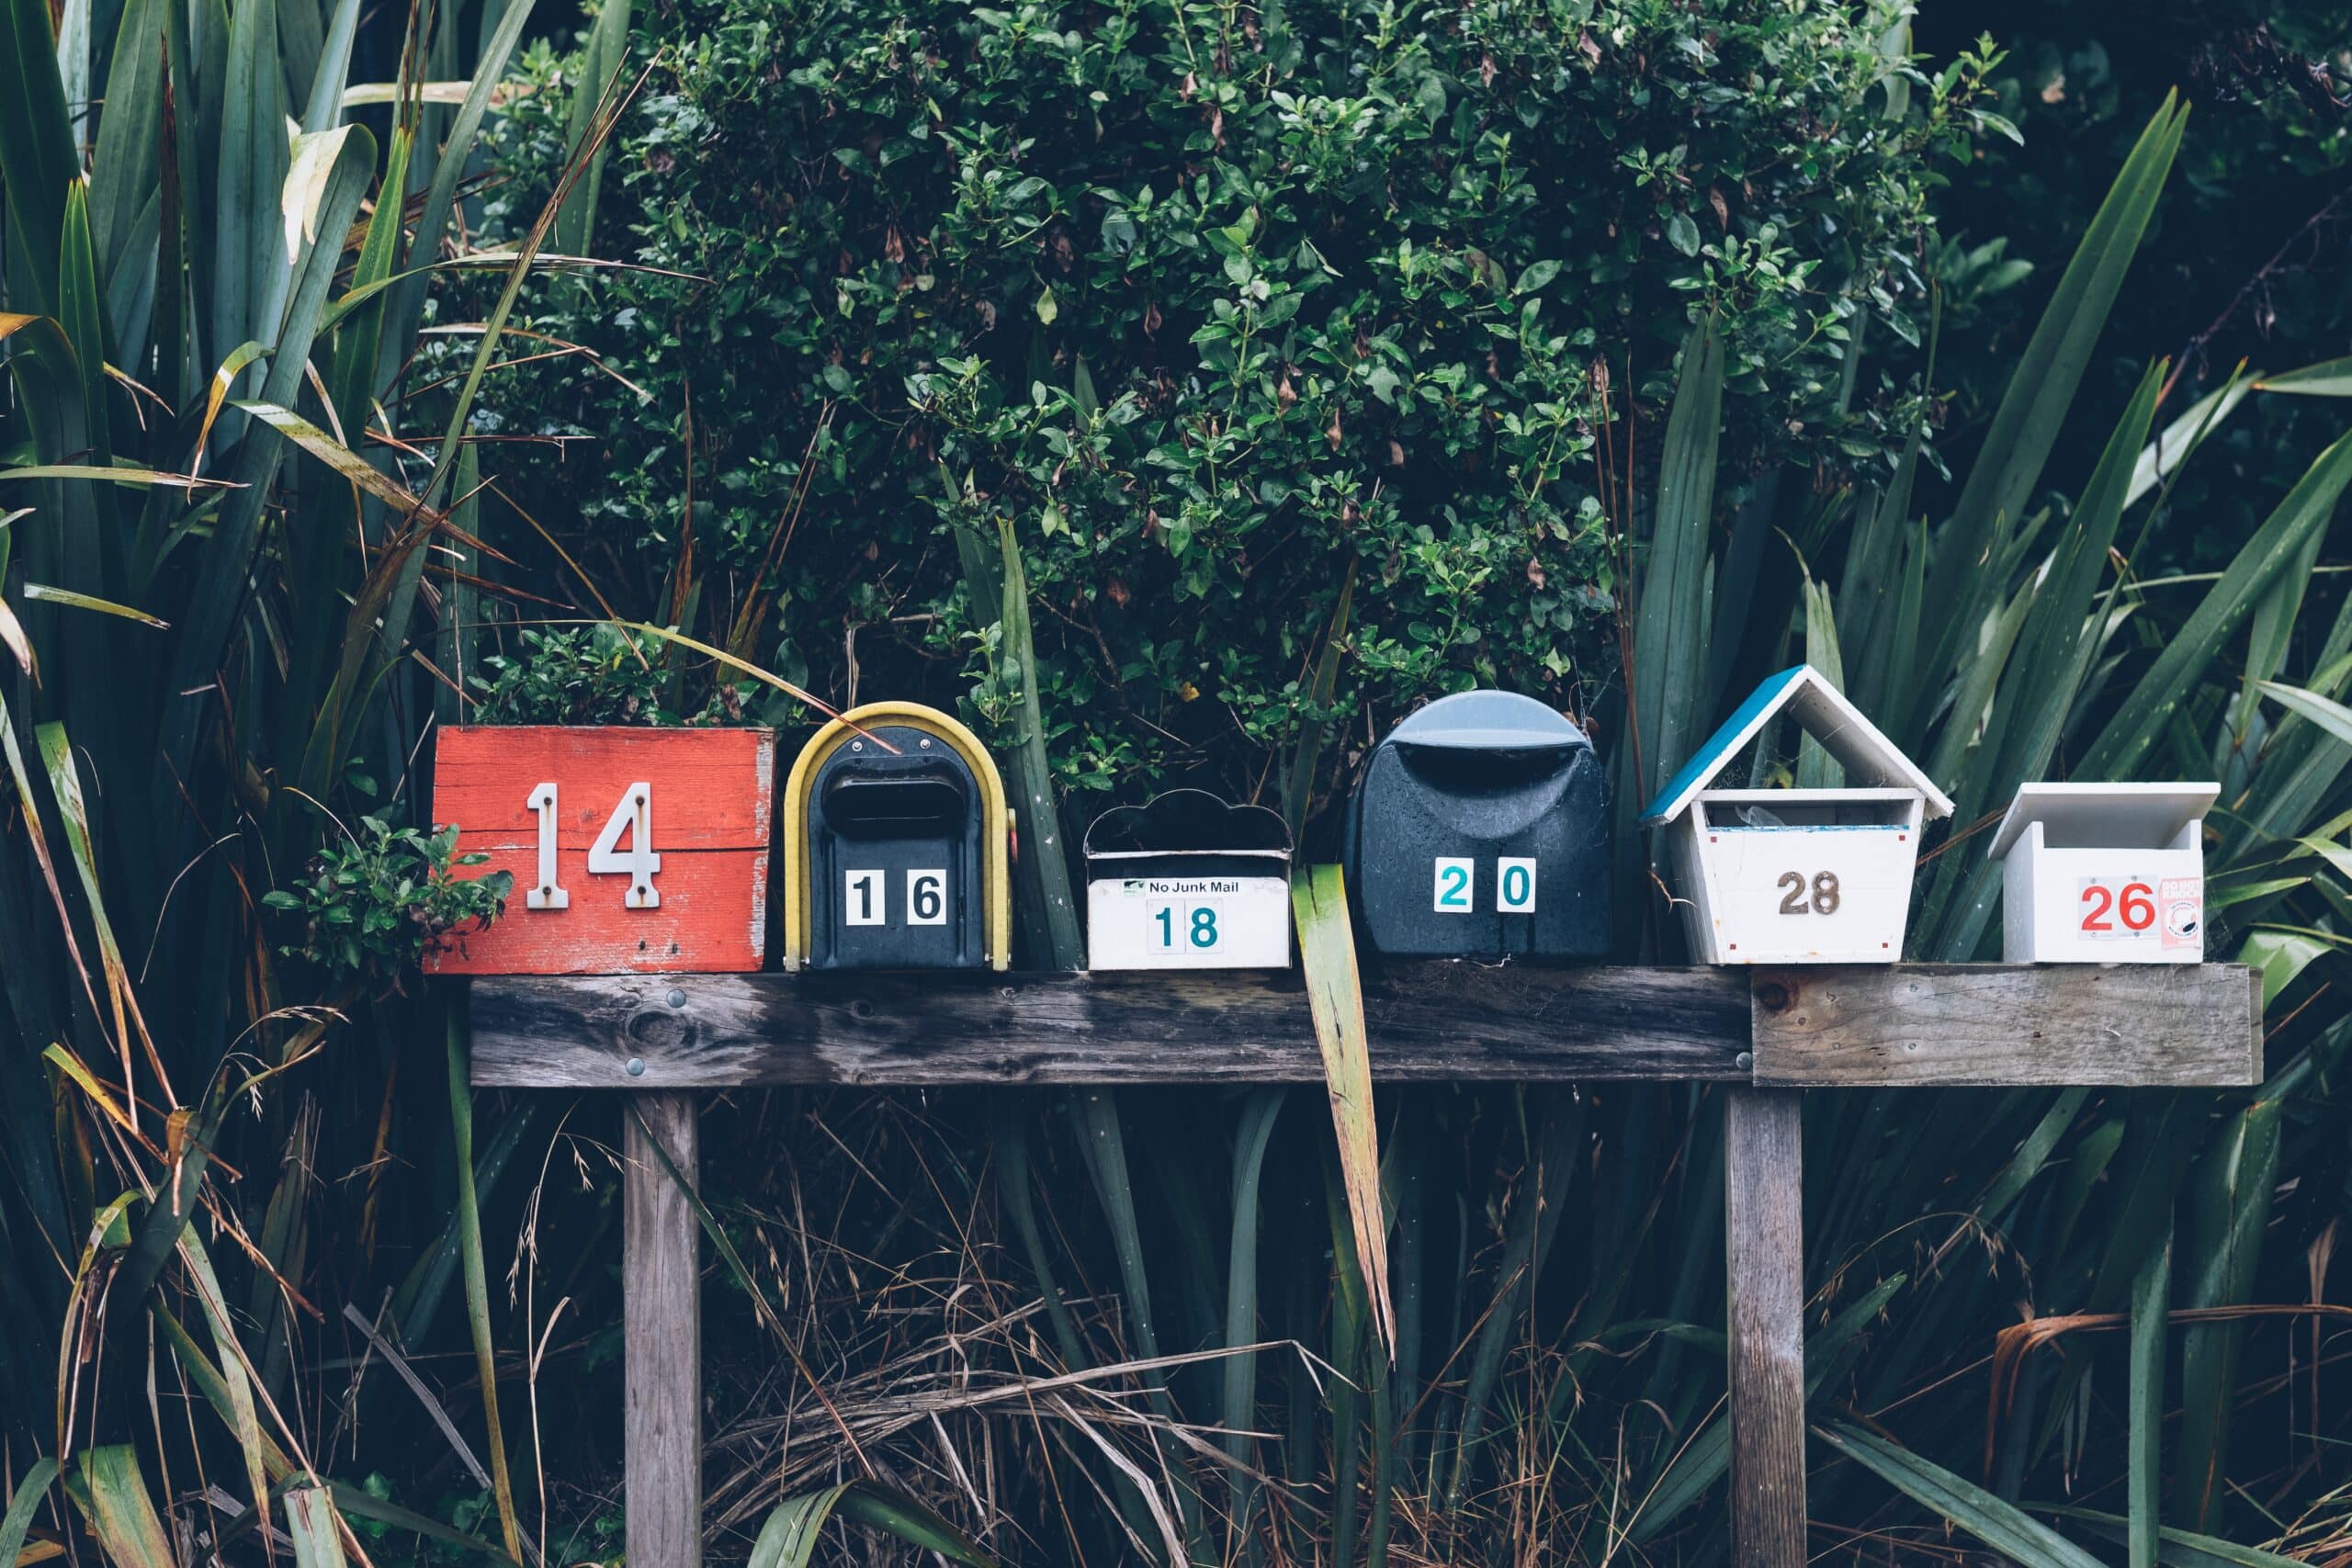 You’ve Got Mail: History of Postal Delivery In Australia